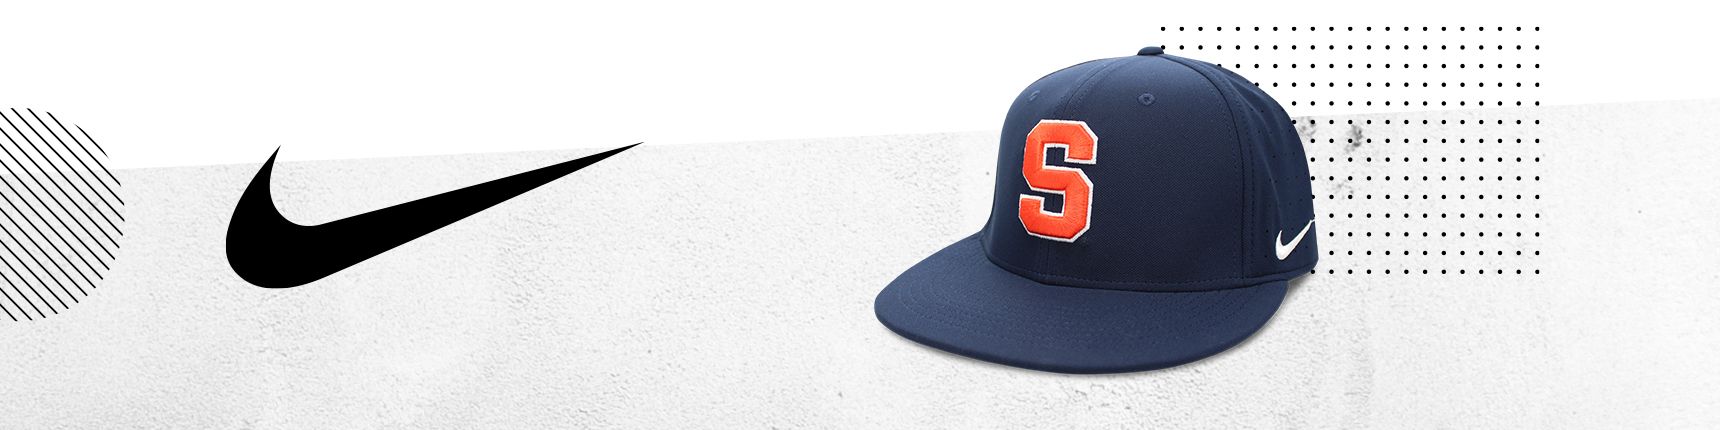 Official Online Store of Syracuse Orange Apparel, Gear, Merchandise & Gifts